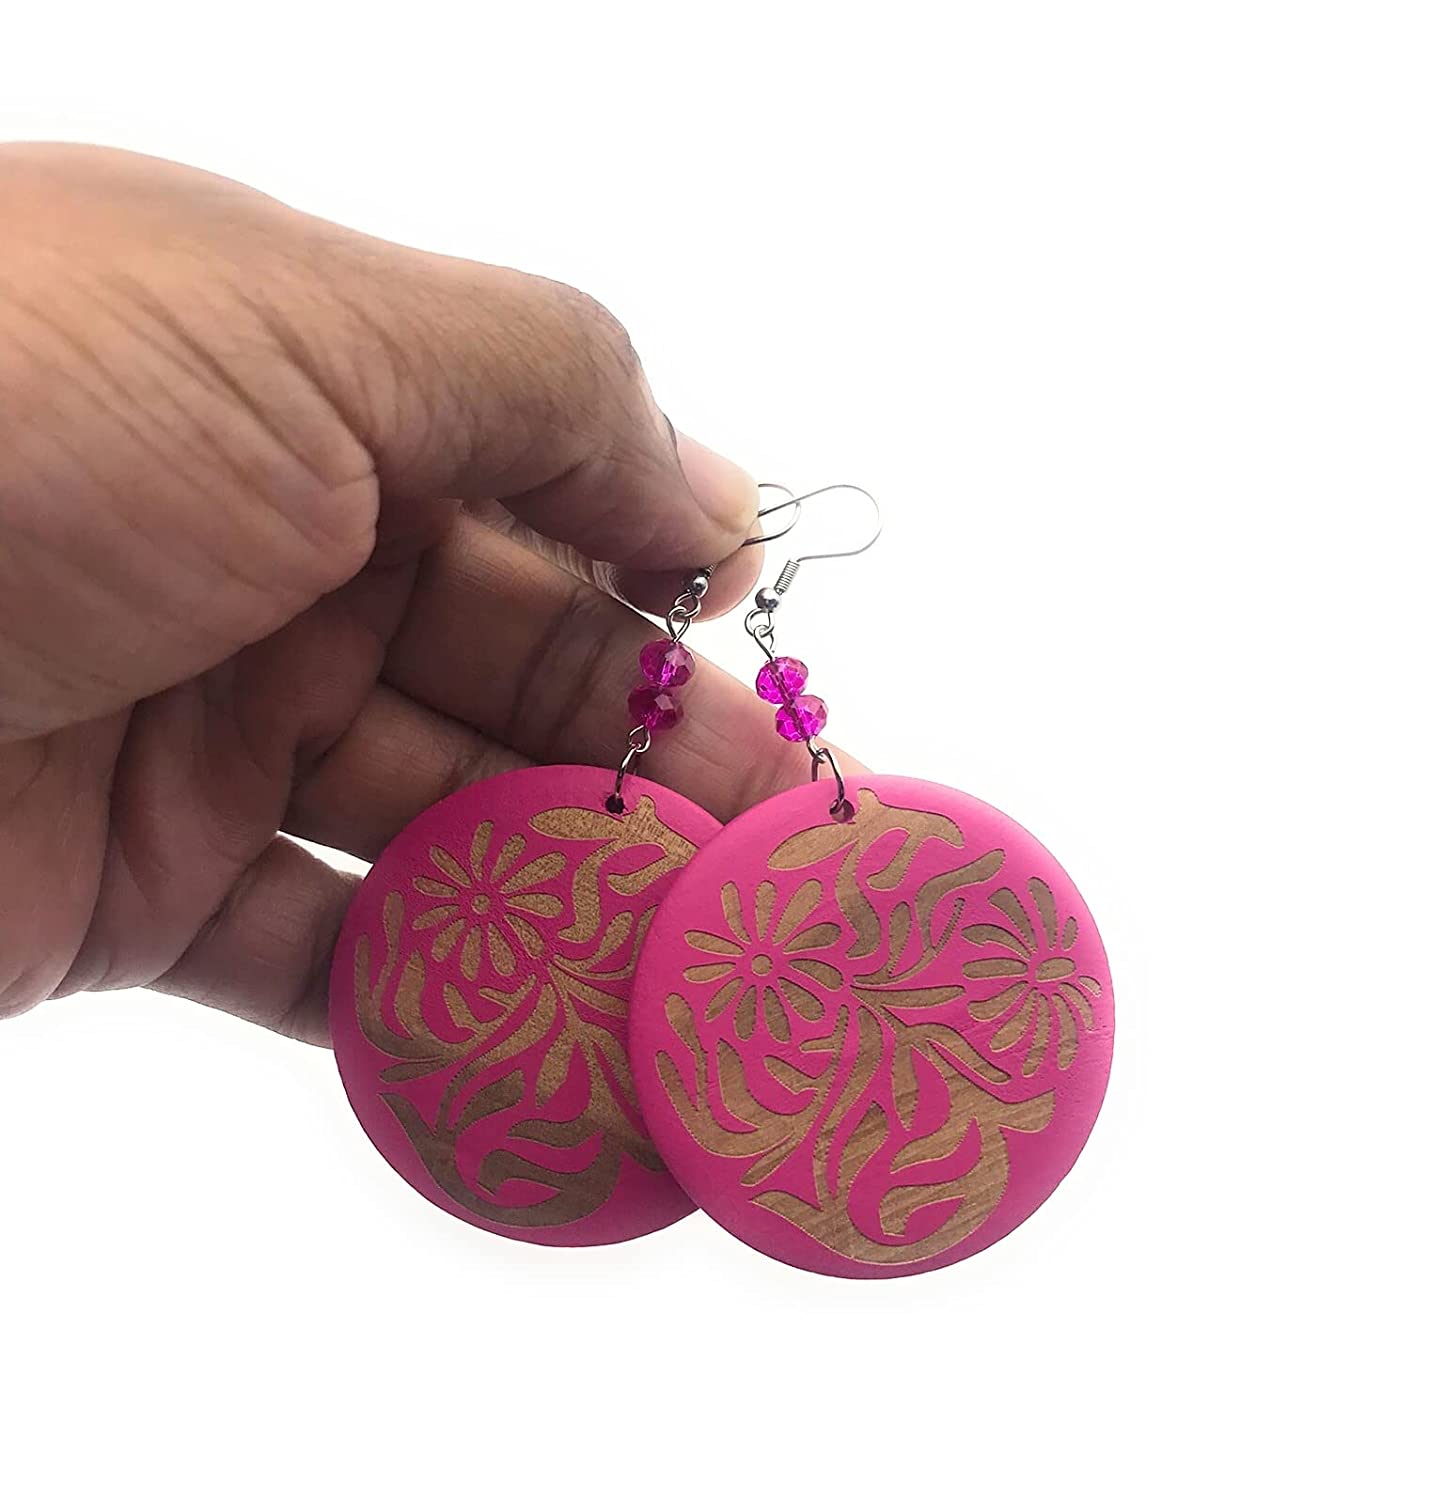 Hot Pink Wooden Dangle Earrings with Beaded Accents Dangling from Fingertips from Scott D Jewelry Designs